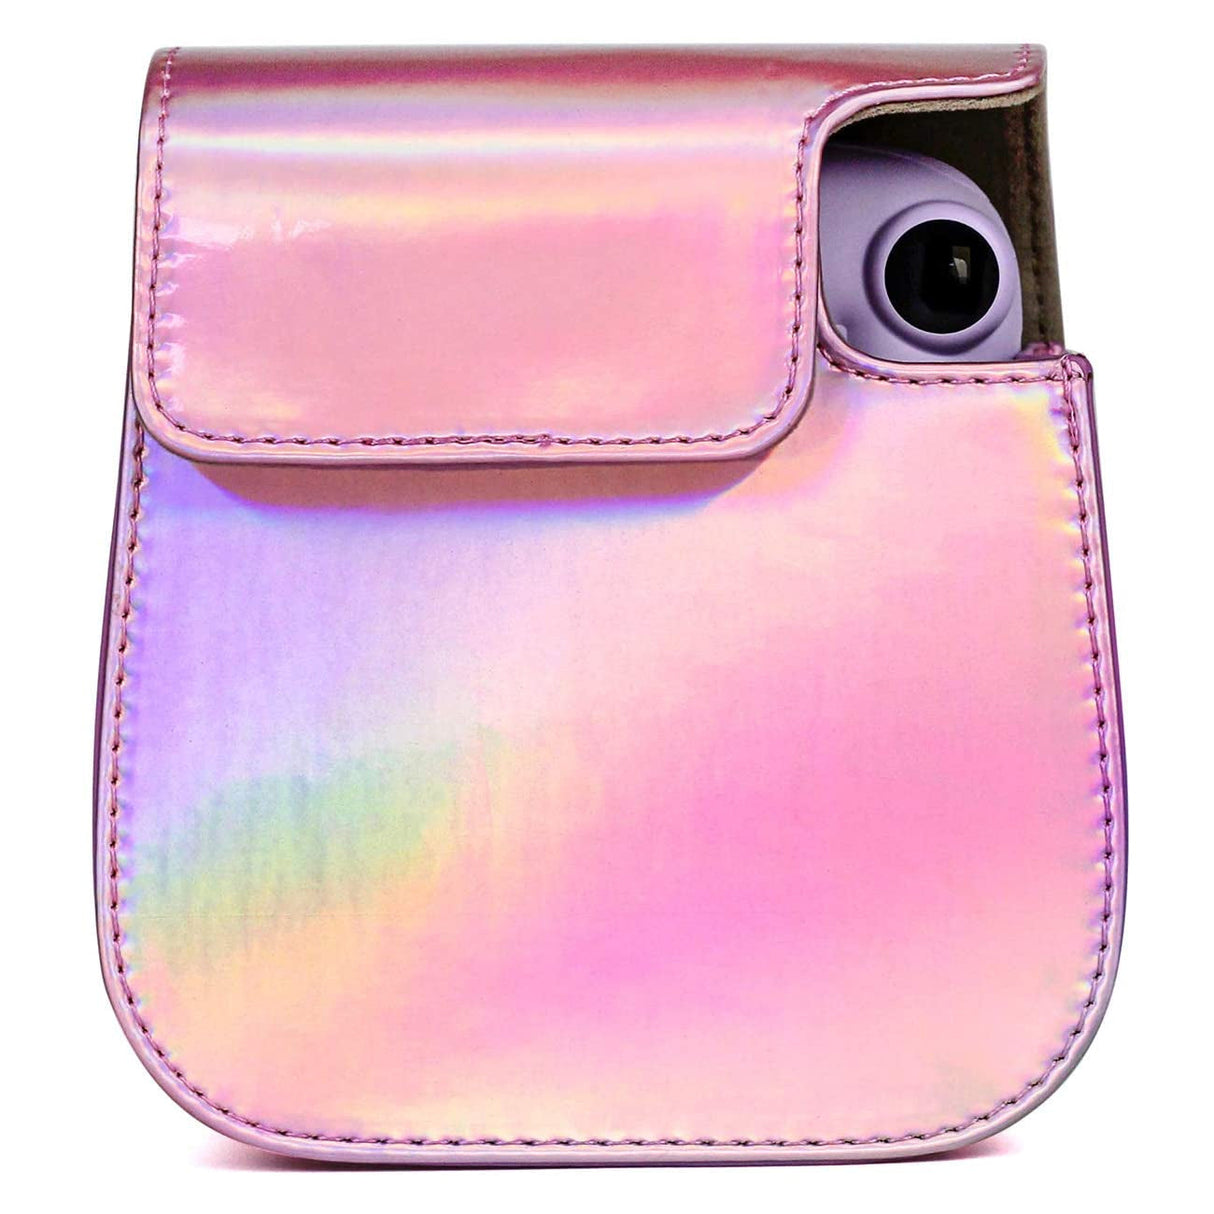 ZENKO MINI 11 8 8+ 9 INSTAX CAMERA POUCH BAG Holographic Pink